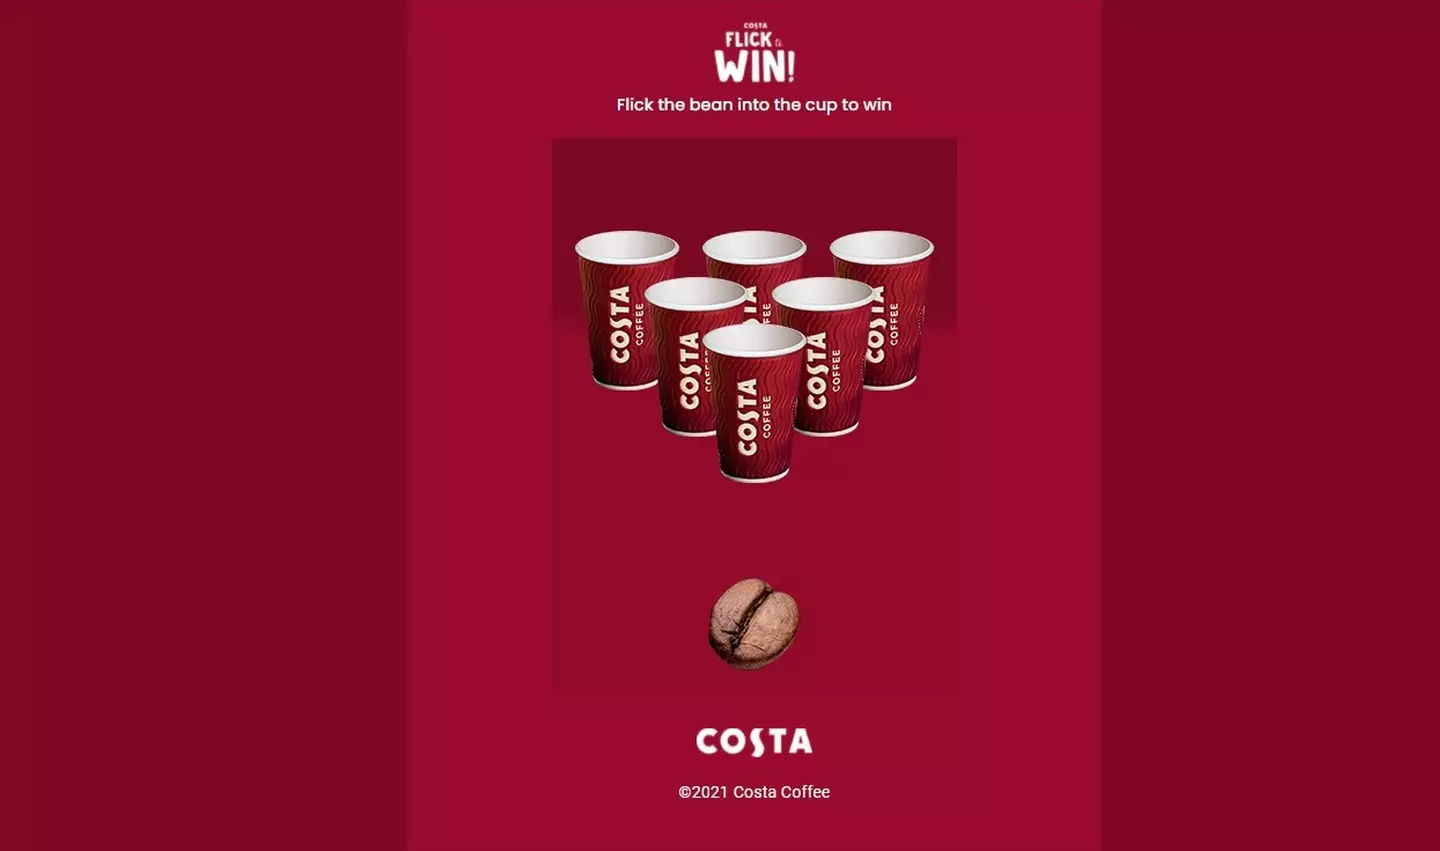 Costa launched a competition on social media (